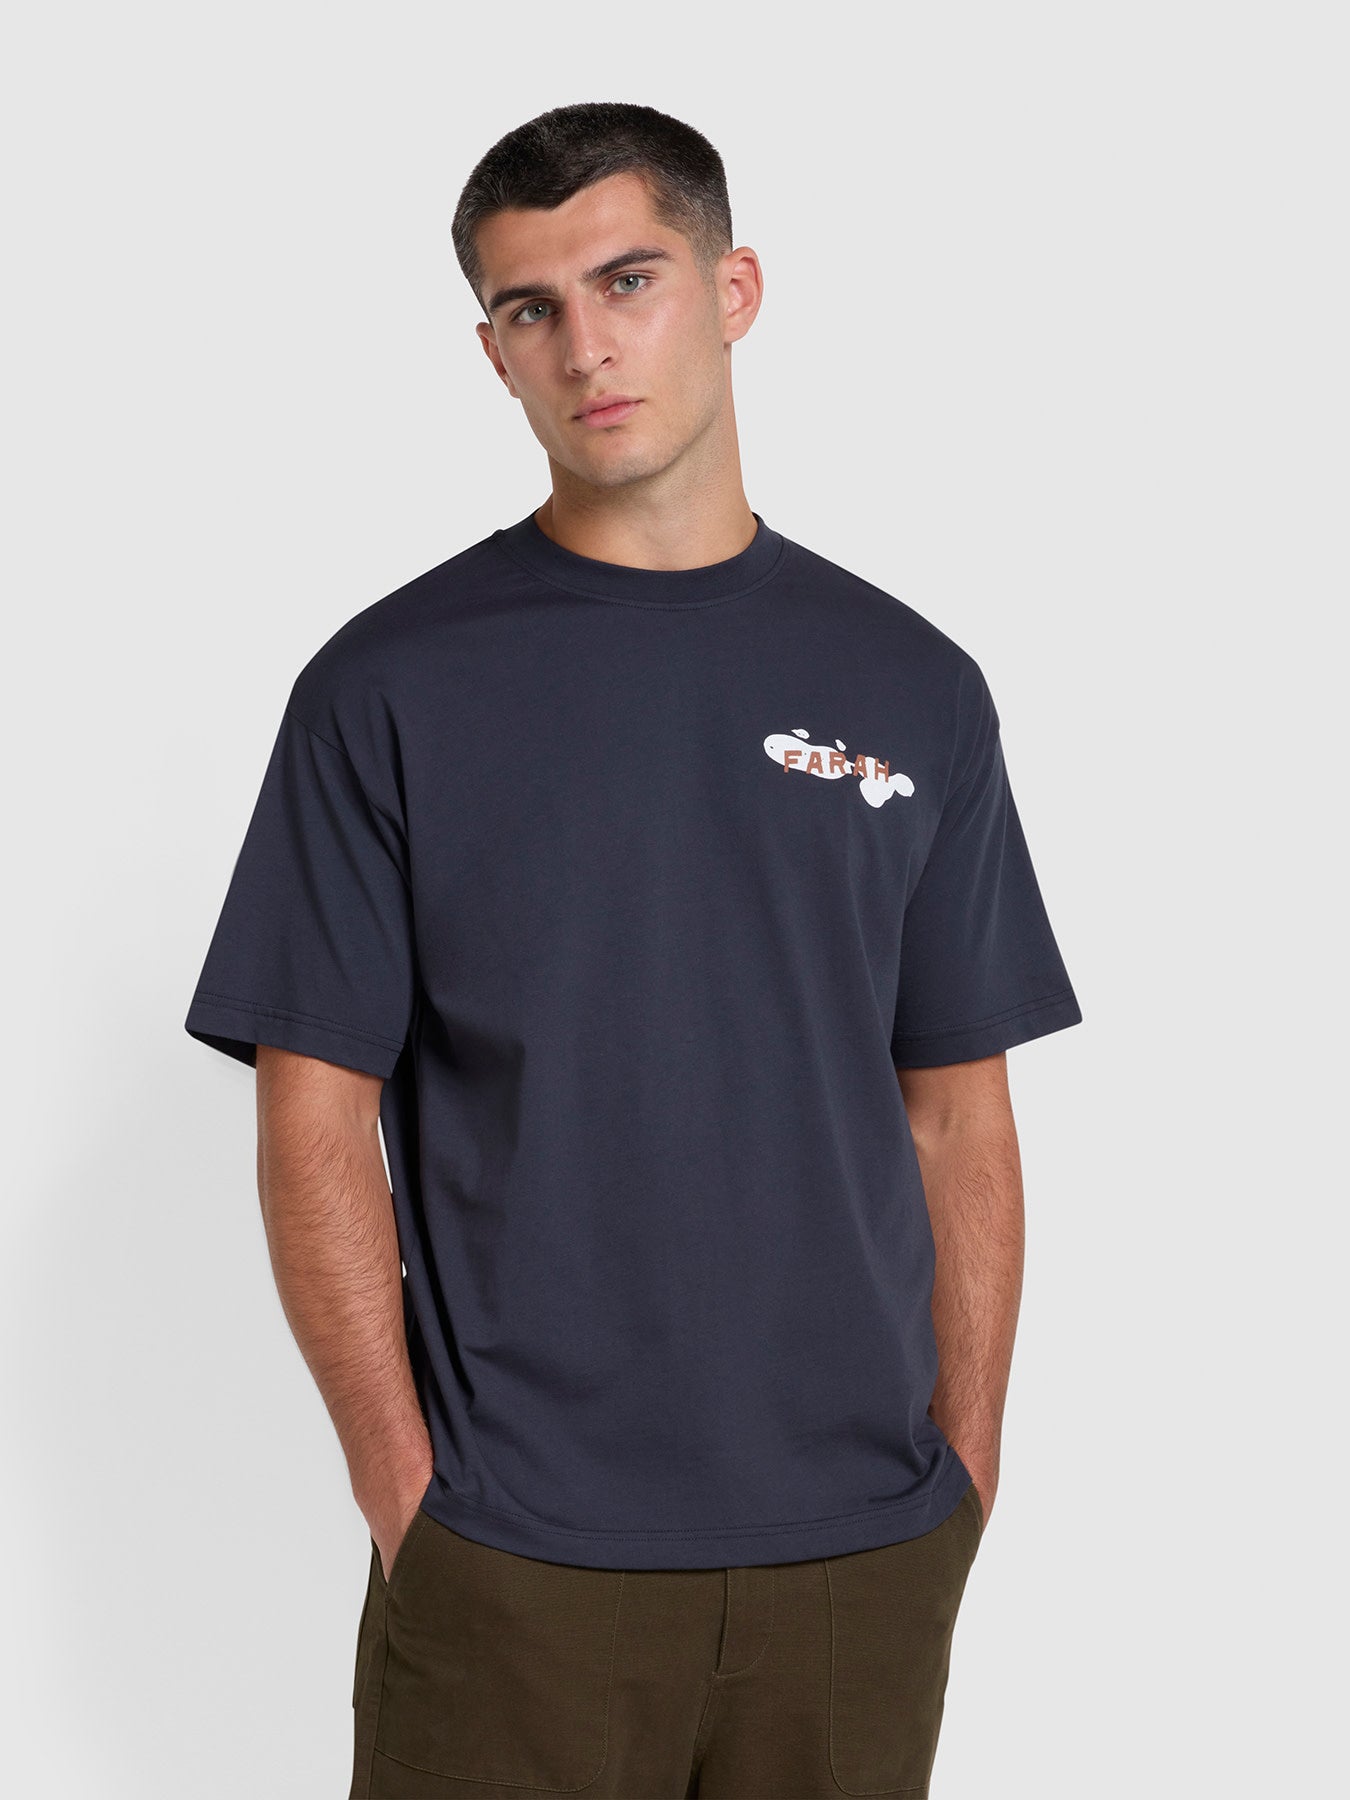 View Farah Guy Graphic Relaxed Fit Organic Cotton TShirt In True Navy Blue Mens information